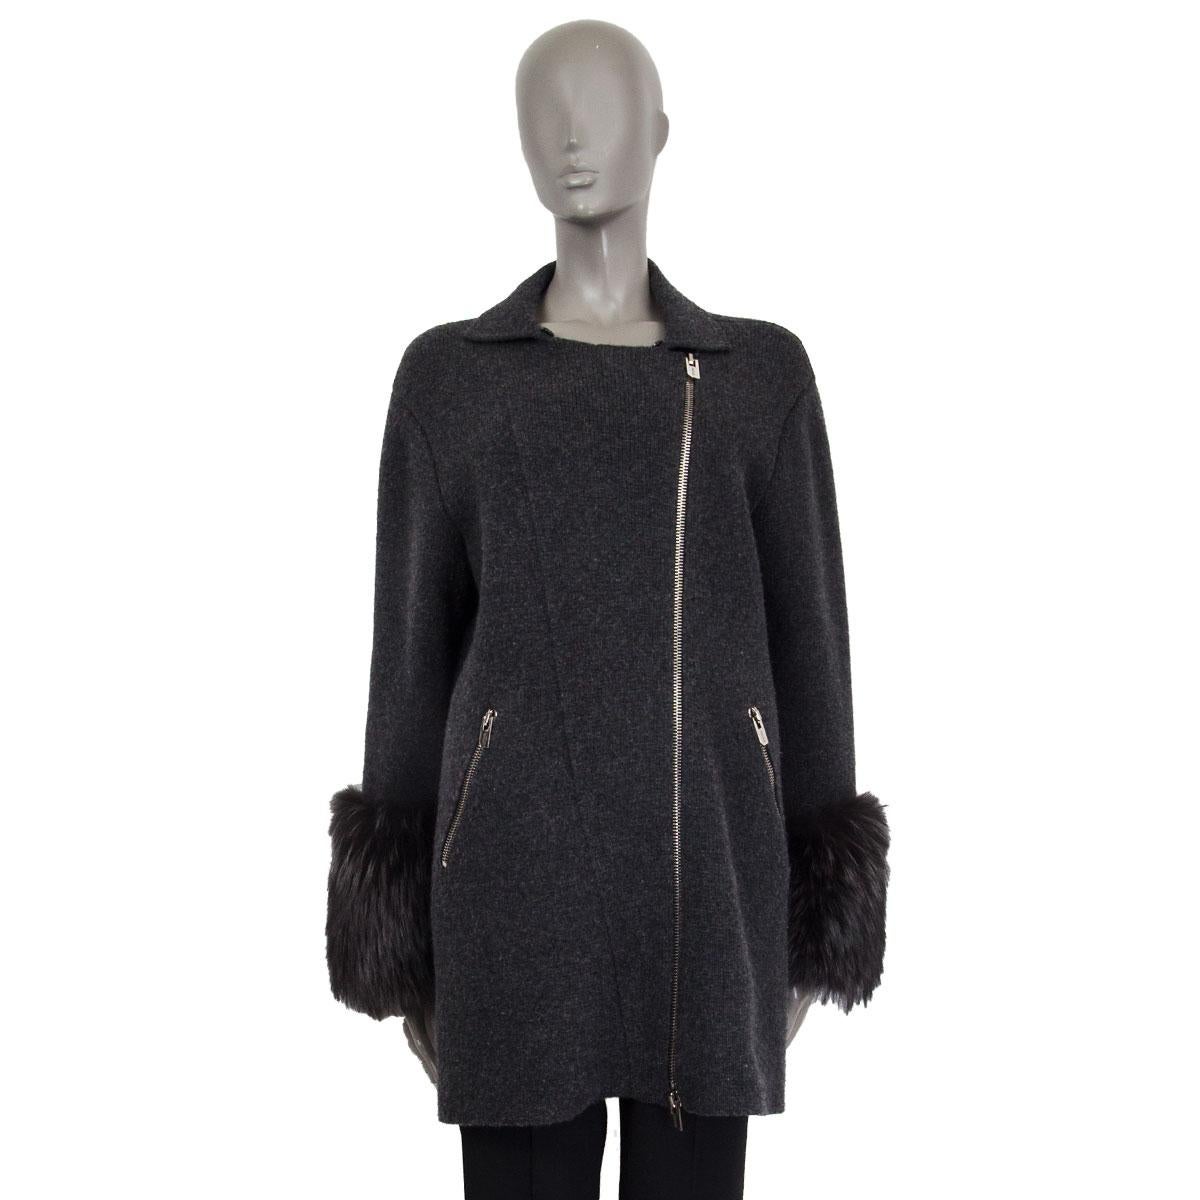 100% authentic Bally fur-cuff knit jacket in dark gray wool (70%), cashmere (30%) and with cuffs in silver fox (100%). Closes with a zipper on the front and with zipped pockets. Unlined. Has been worn and is in excellent condition.

Tag Size 36
Size